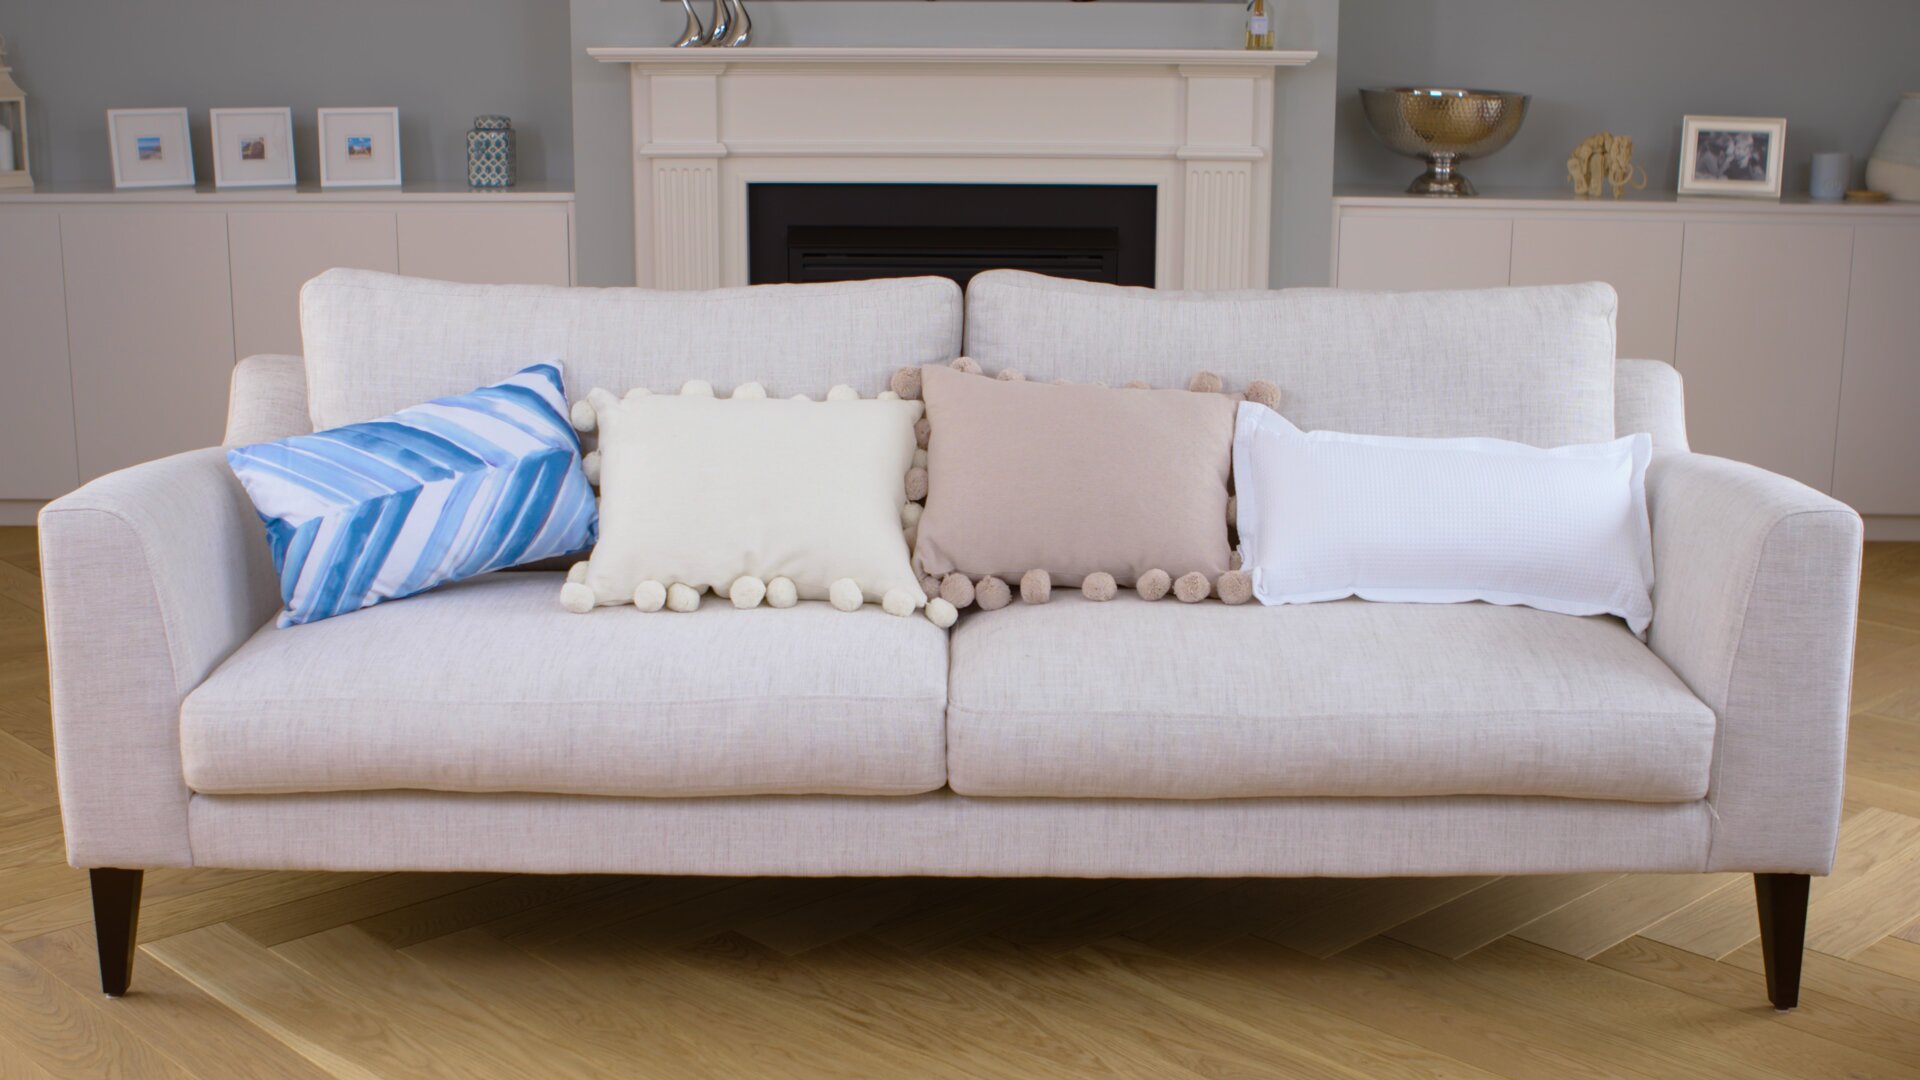 Home Decor Cushions Buying Guide